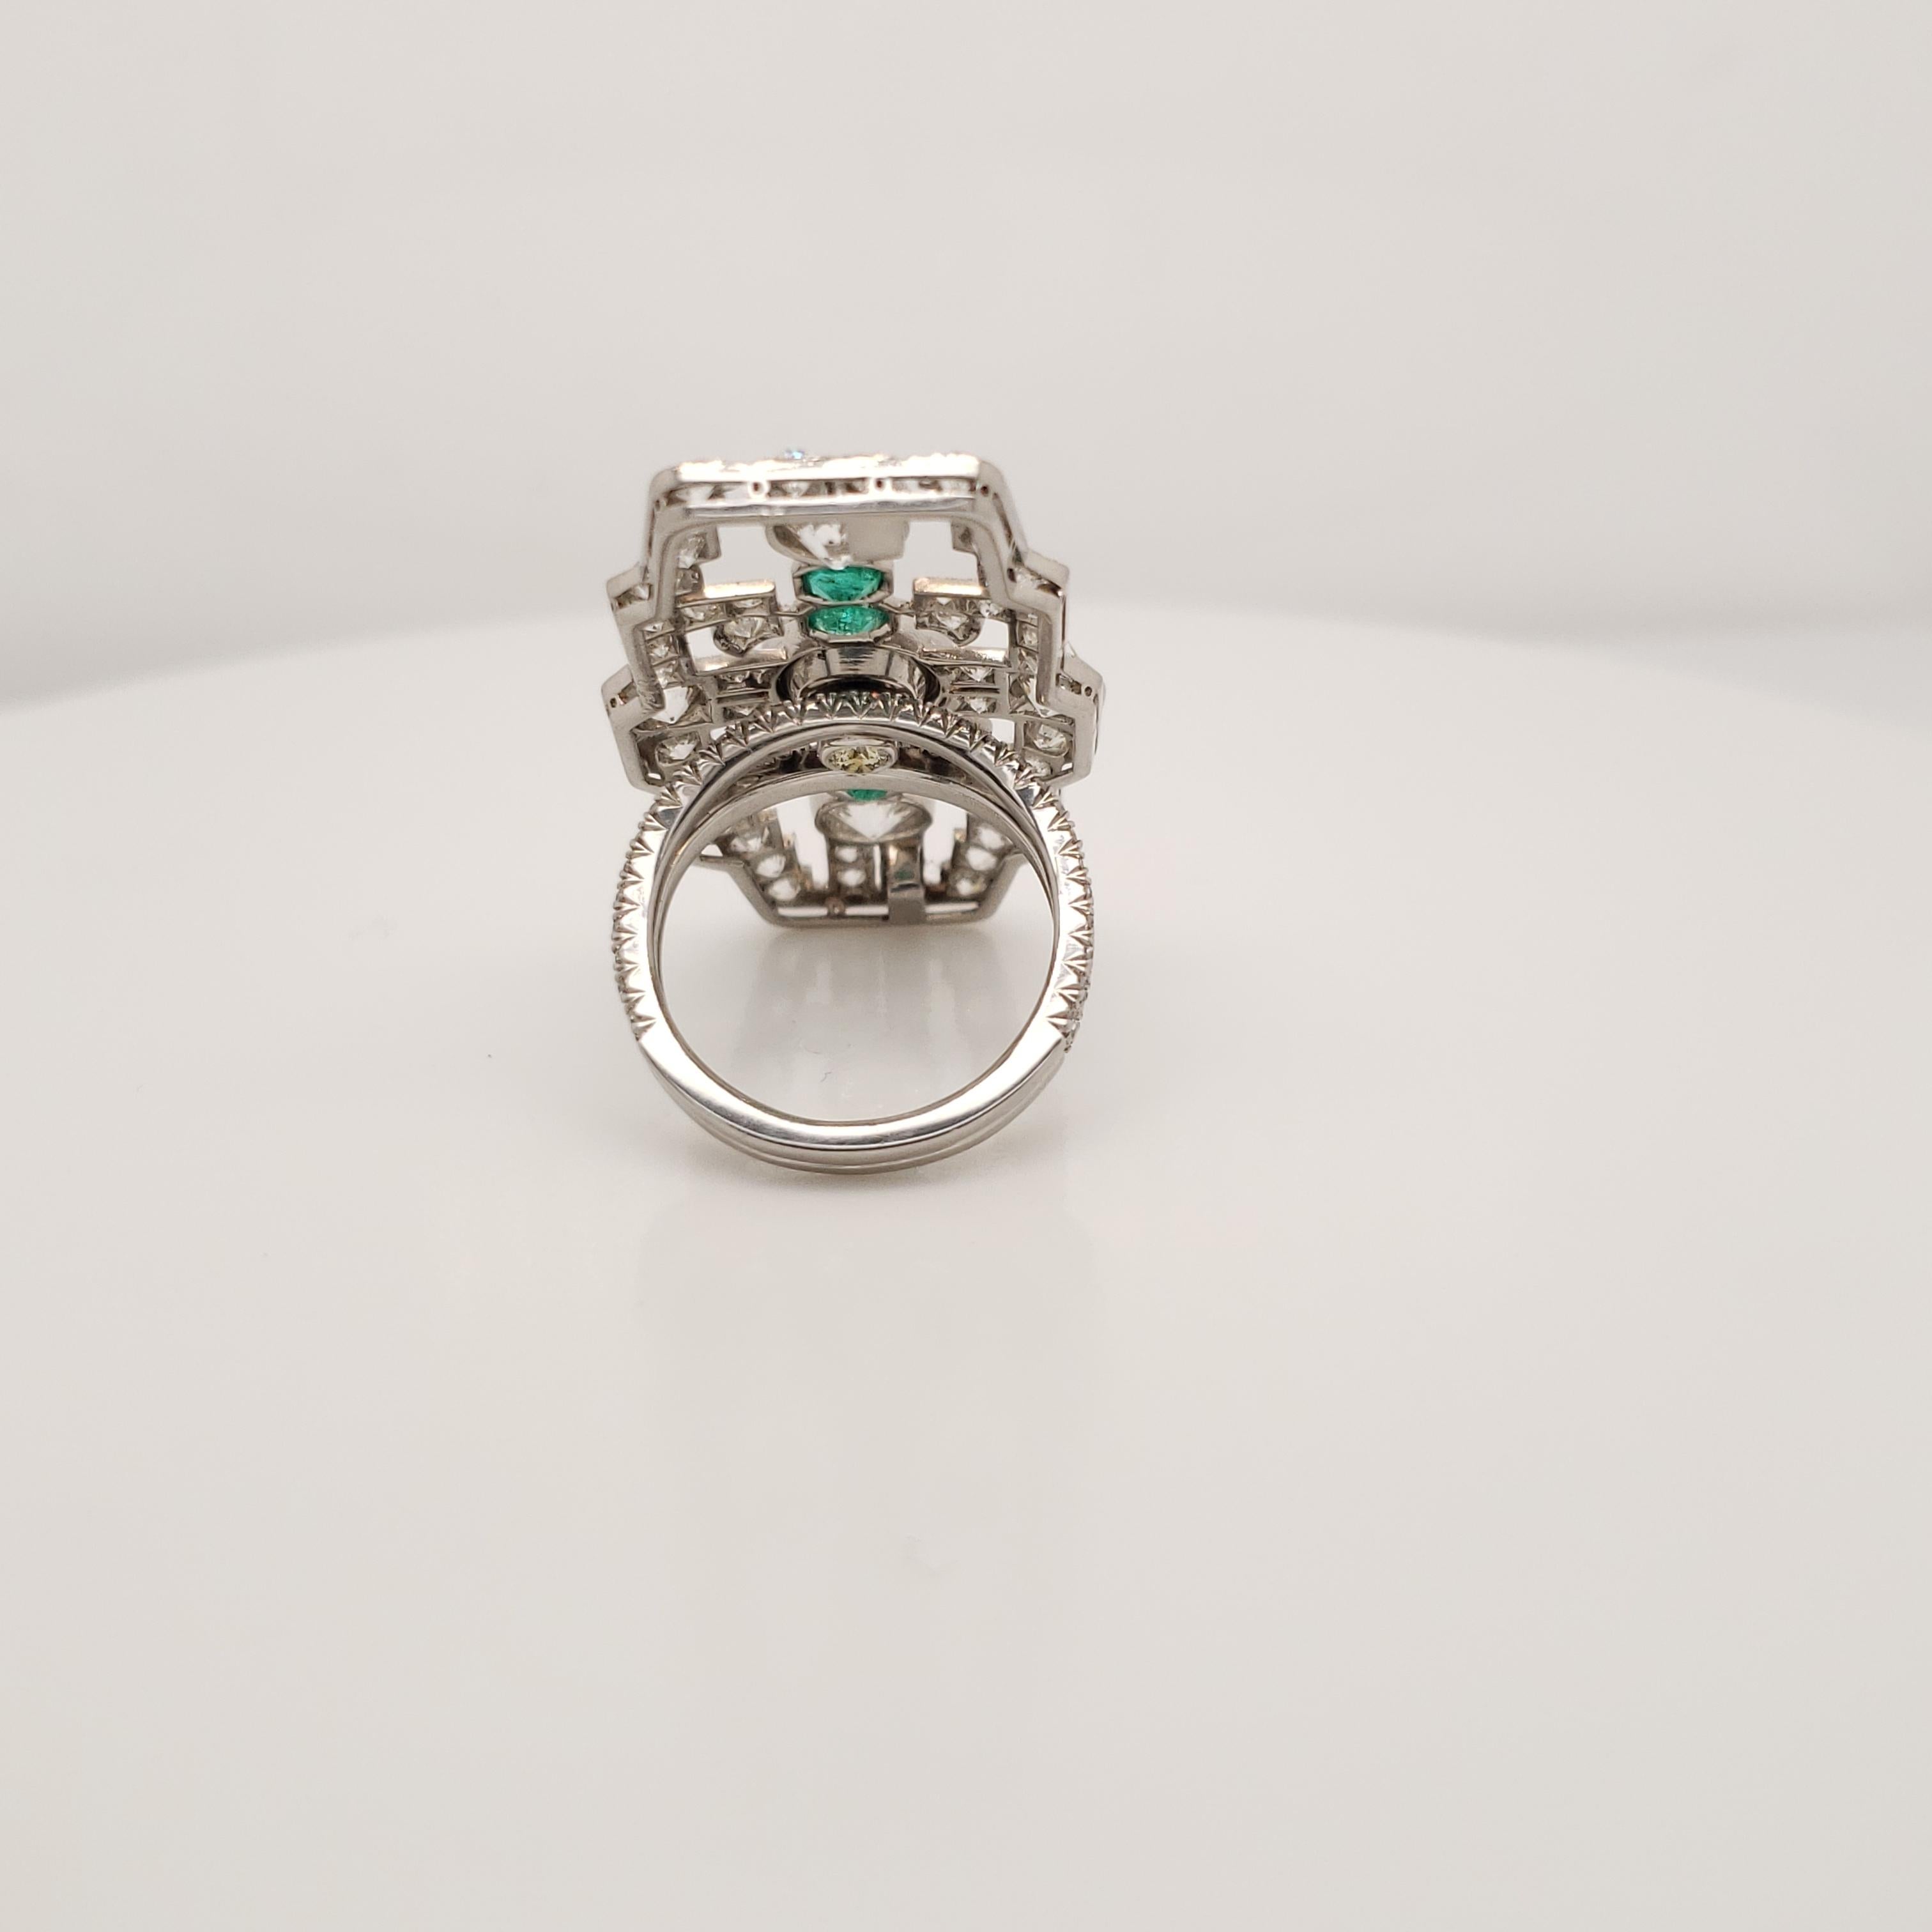 This large Diamond and Emerald Statement Ring contains a 1 GIA certified, Round Brilliant Cut, Fancy Deep Greenish Yellow diamond weighing 1.76 carats.
It is mounted with four emeralds, and Old Mine Round diamonds weighing a total of 5.99 carats.
It